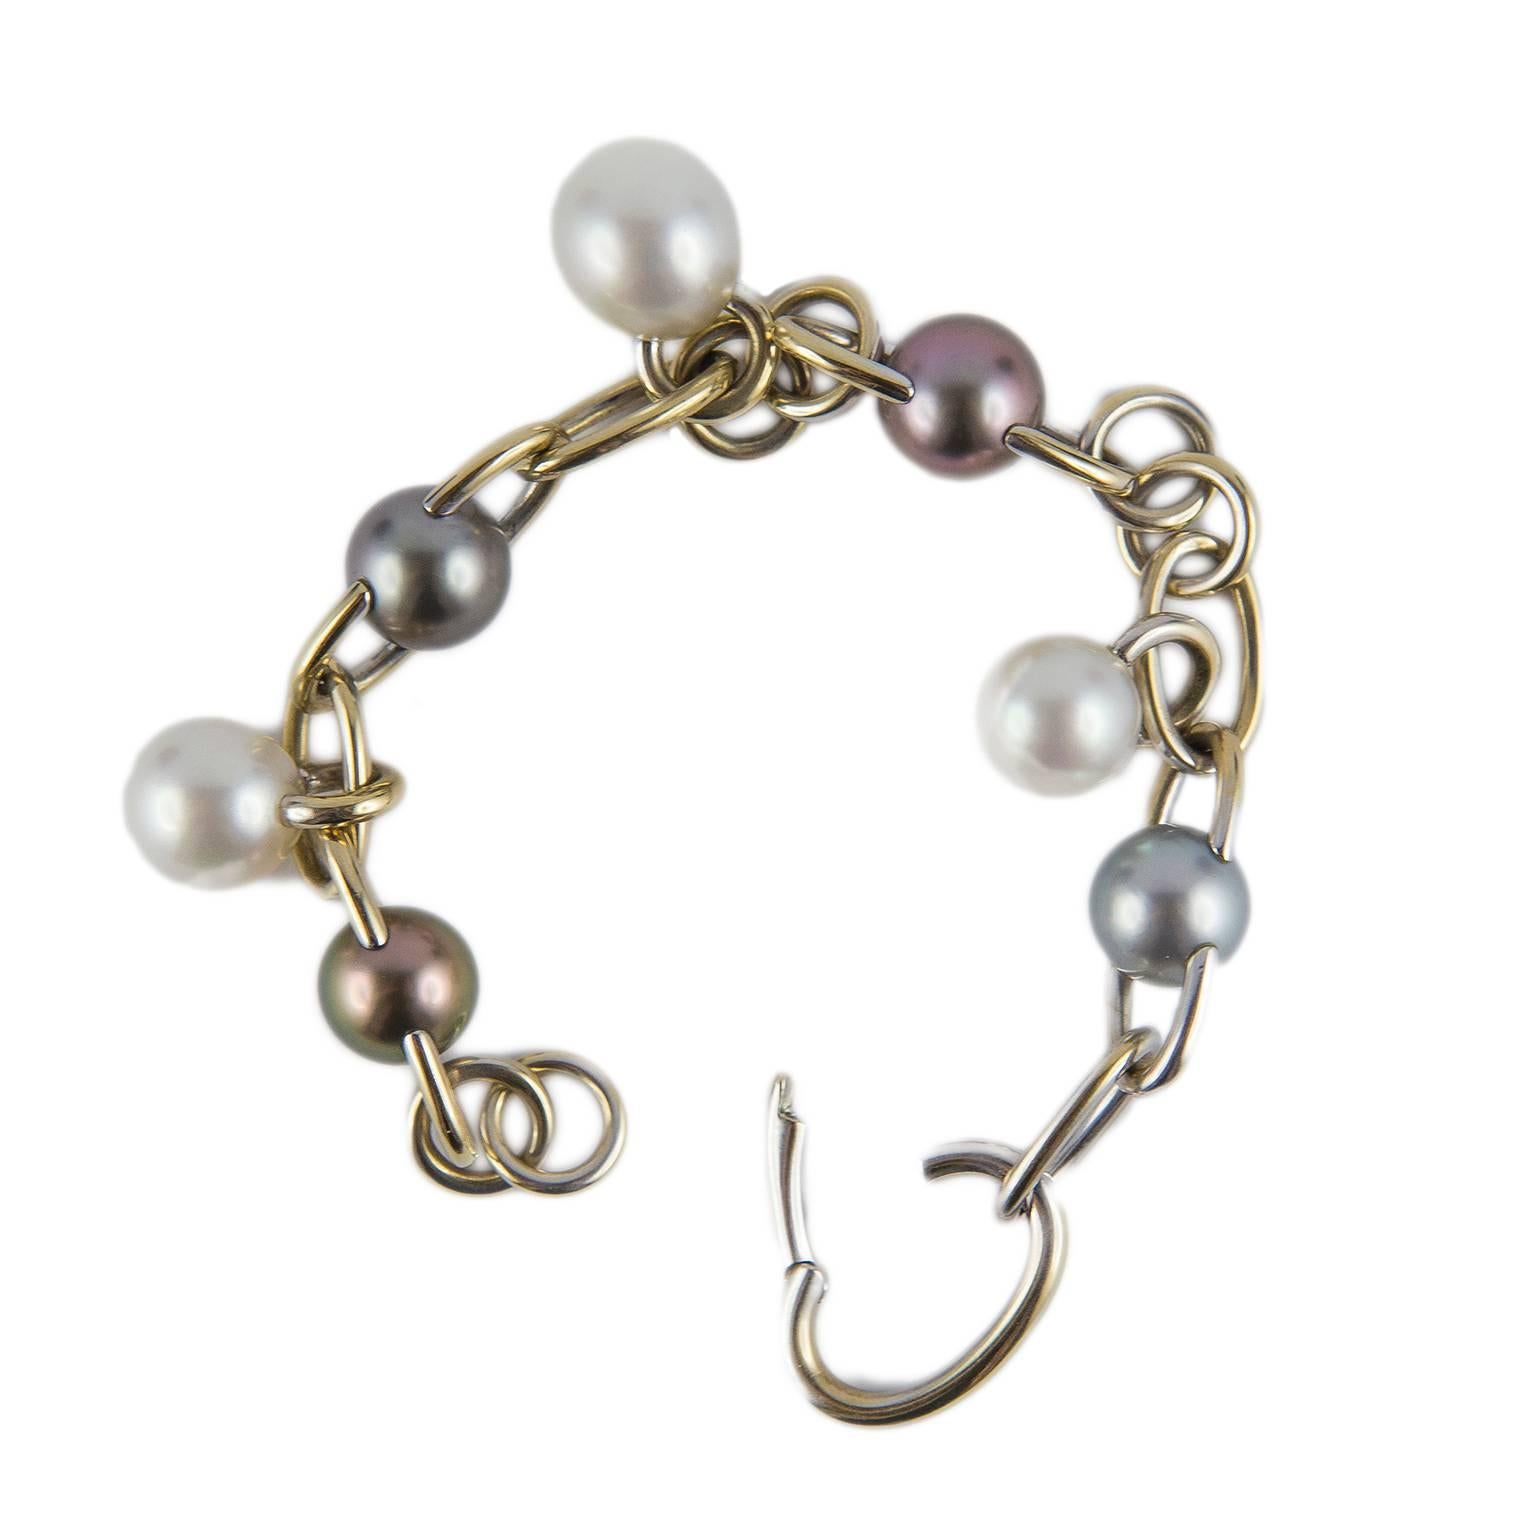 Elegant 18 Karat white gold chain bracelet with very high quality white and grey pearls.